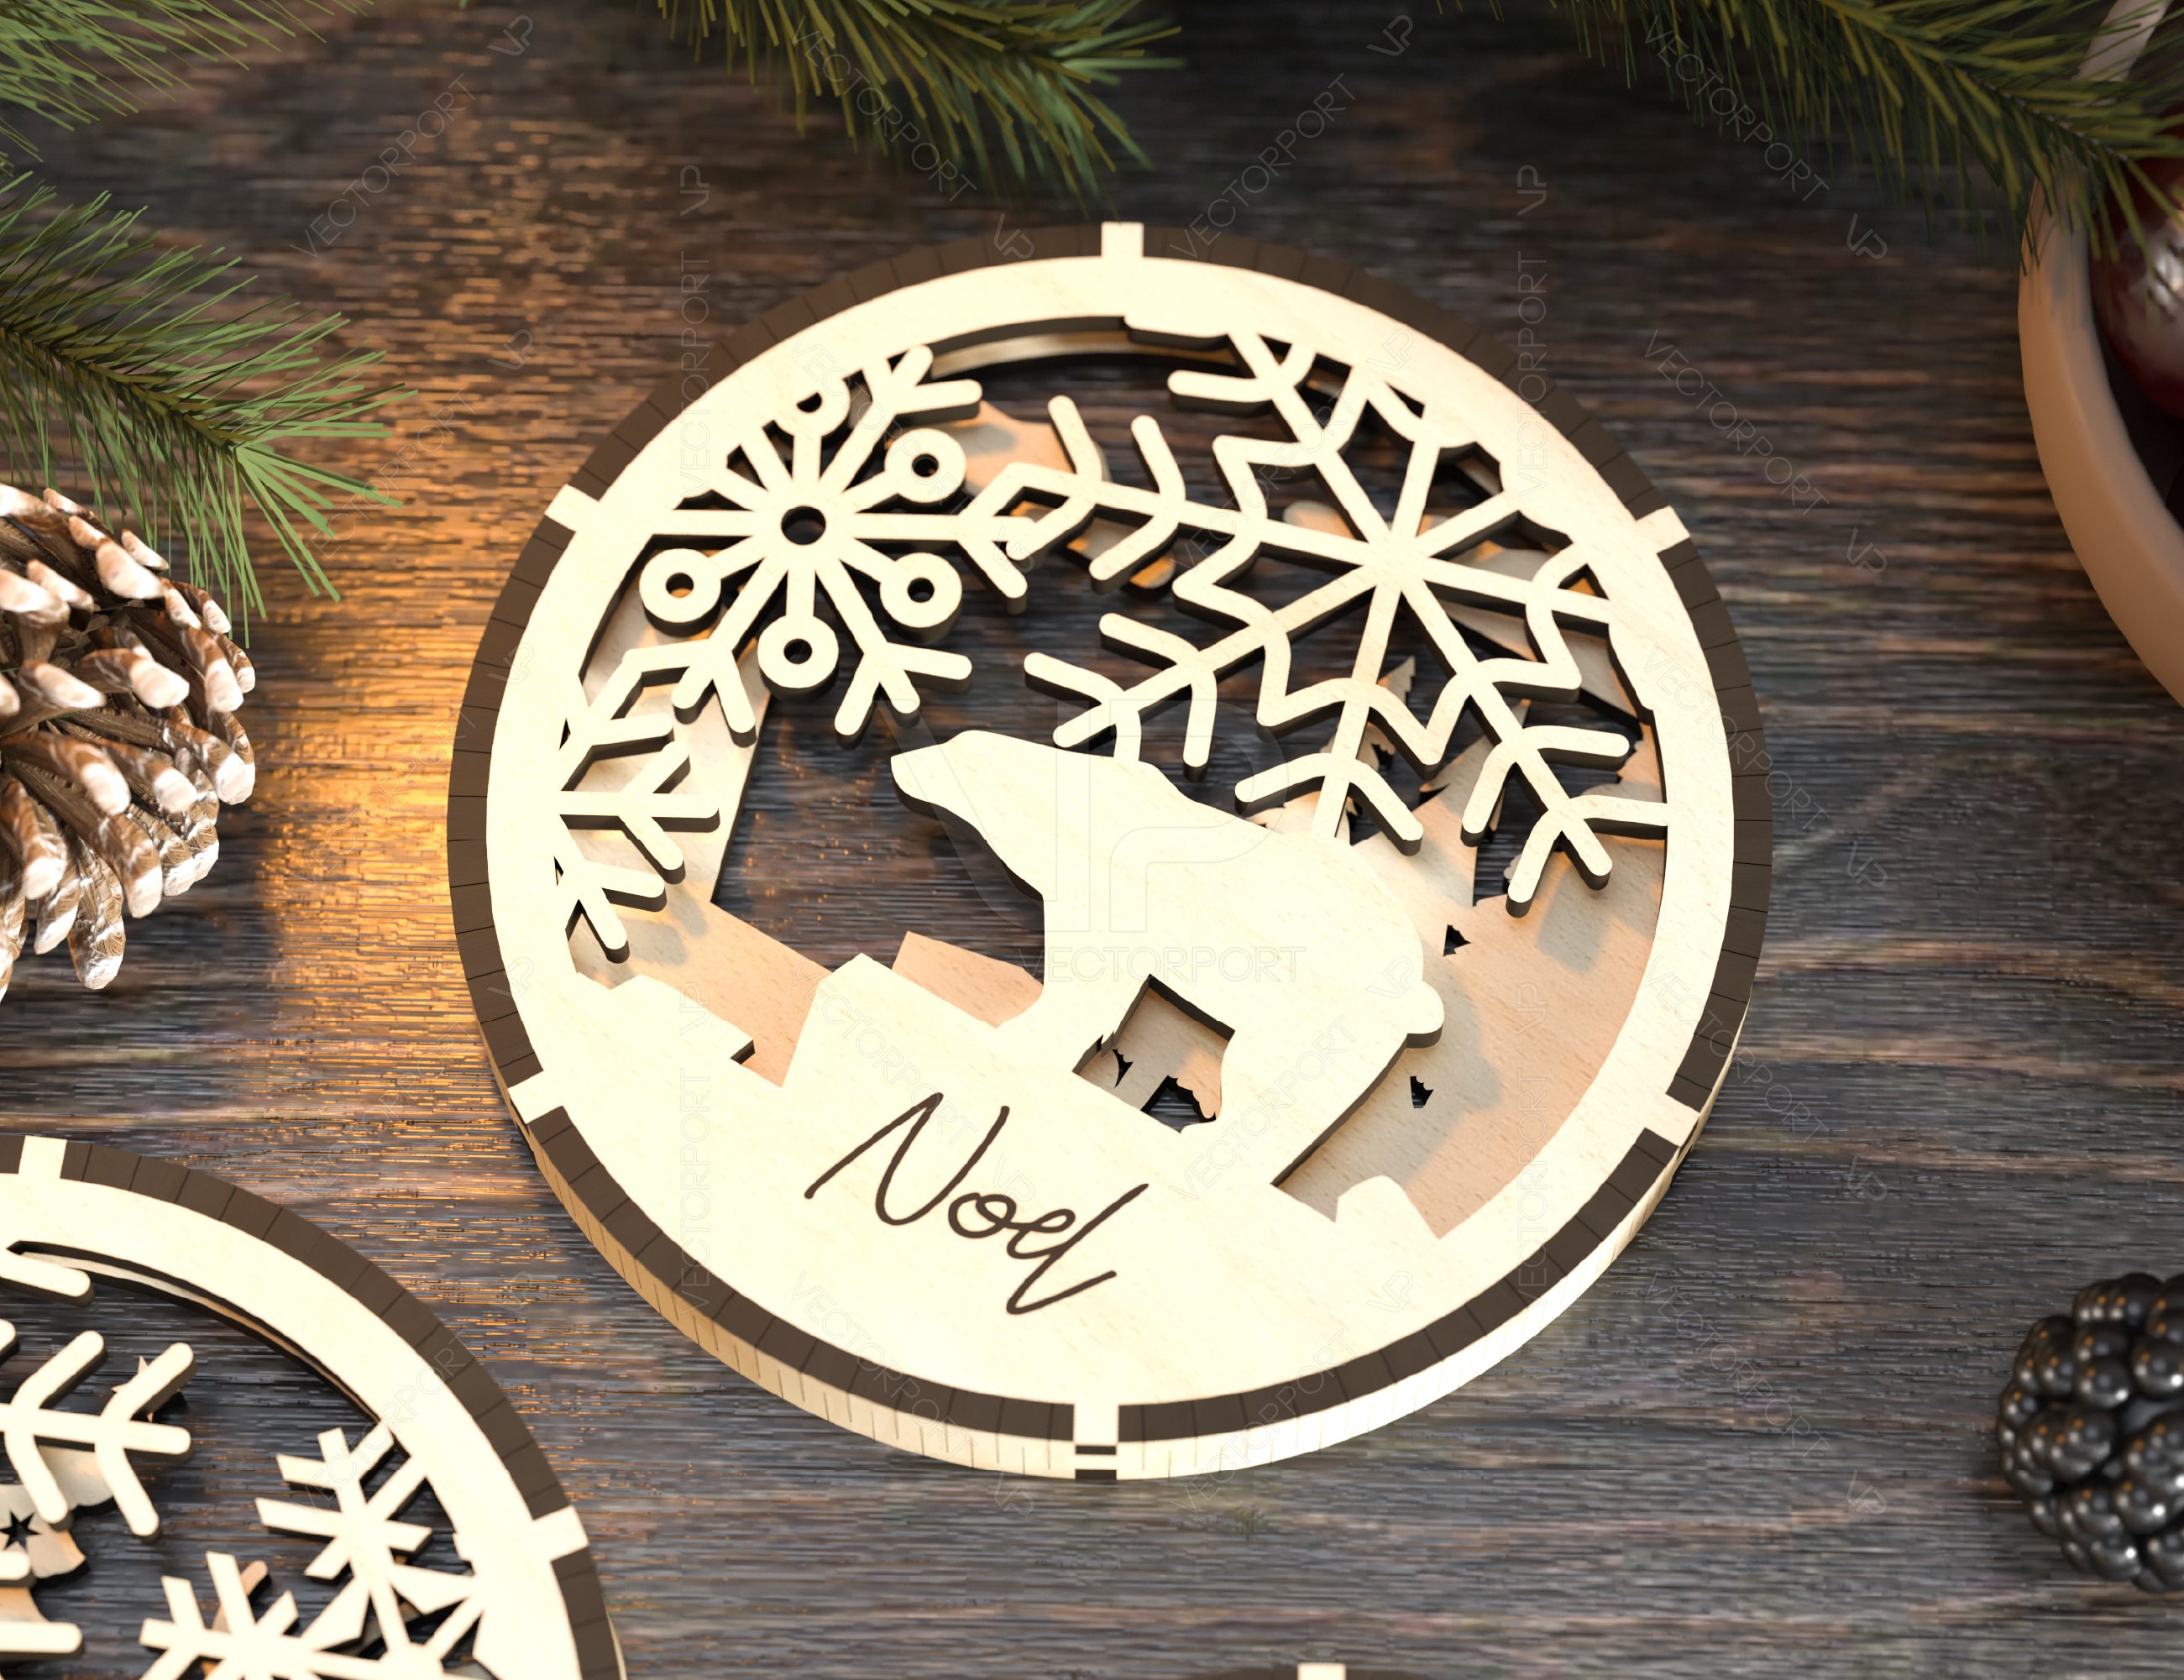 Laser Cut Wood Coaster Ornaments .Unfinished Wood Tags .Rustic leaves  Ornaments,Wood Coasters Cup Mat Placemats - AliExpress